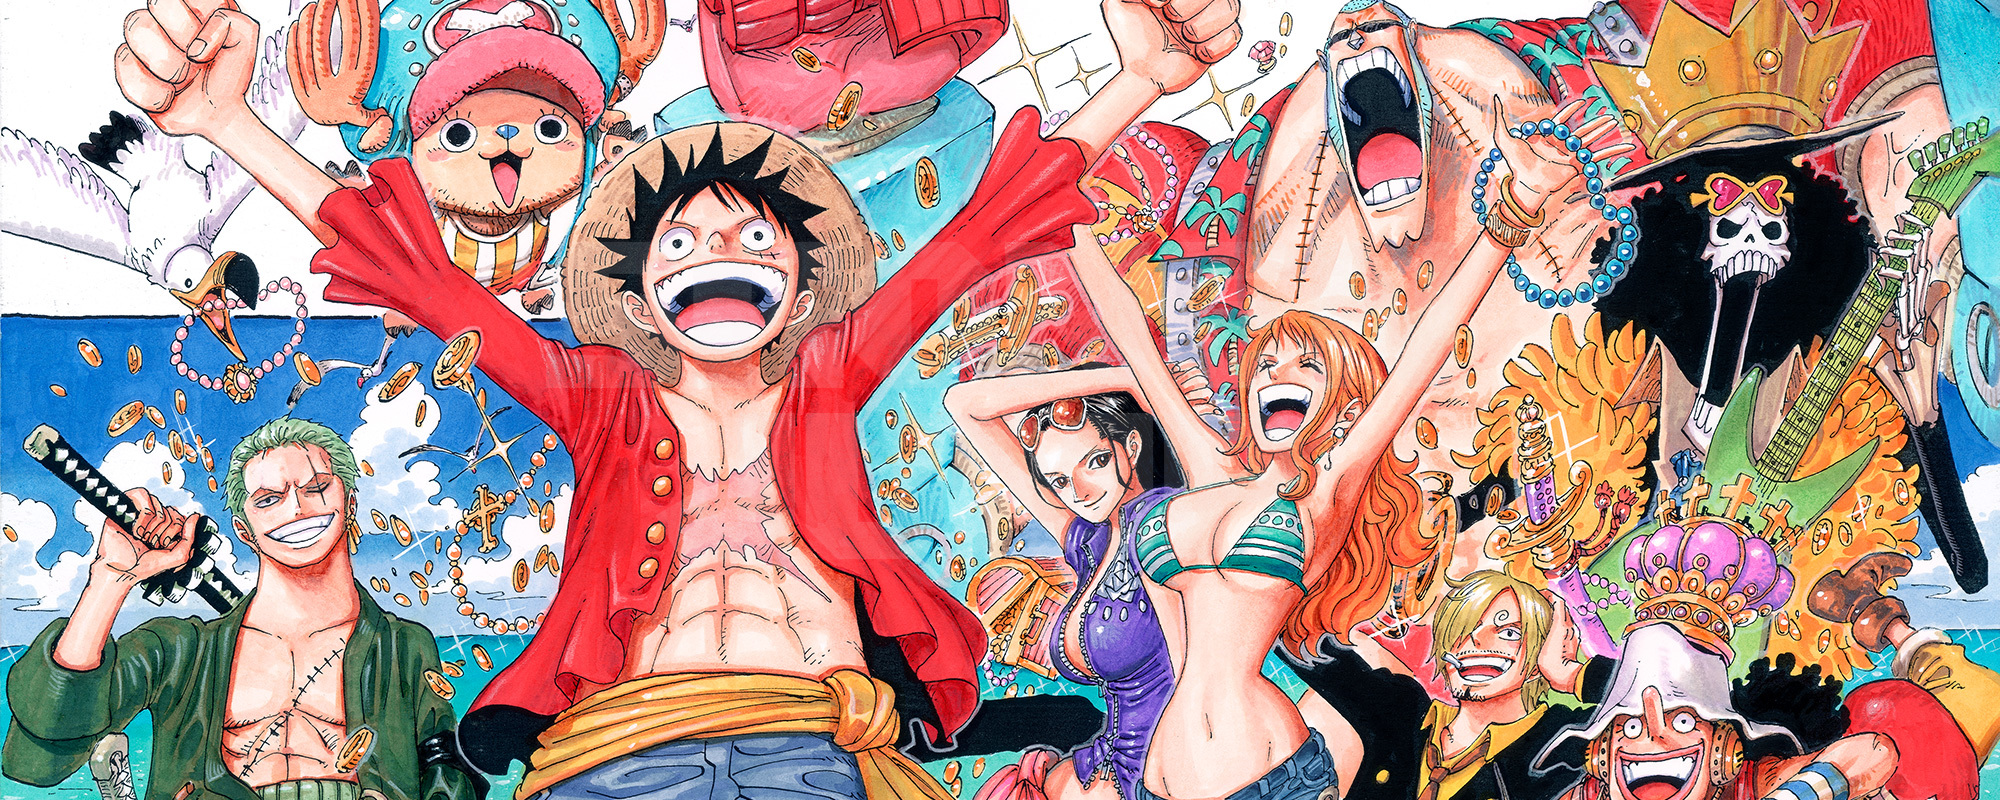 One Piece (TV) - Episodes and Seasons List